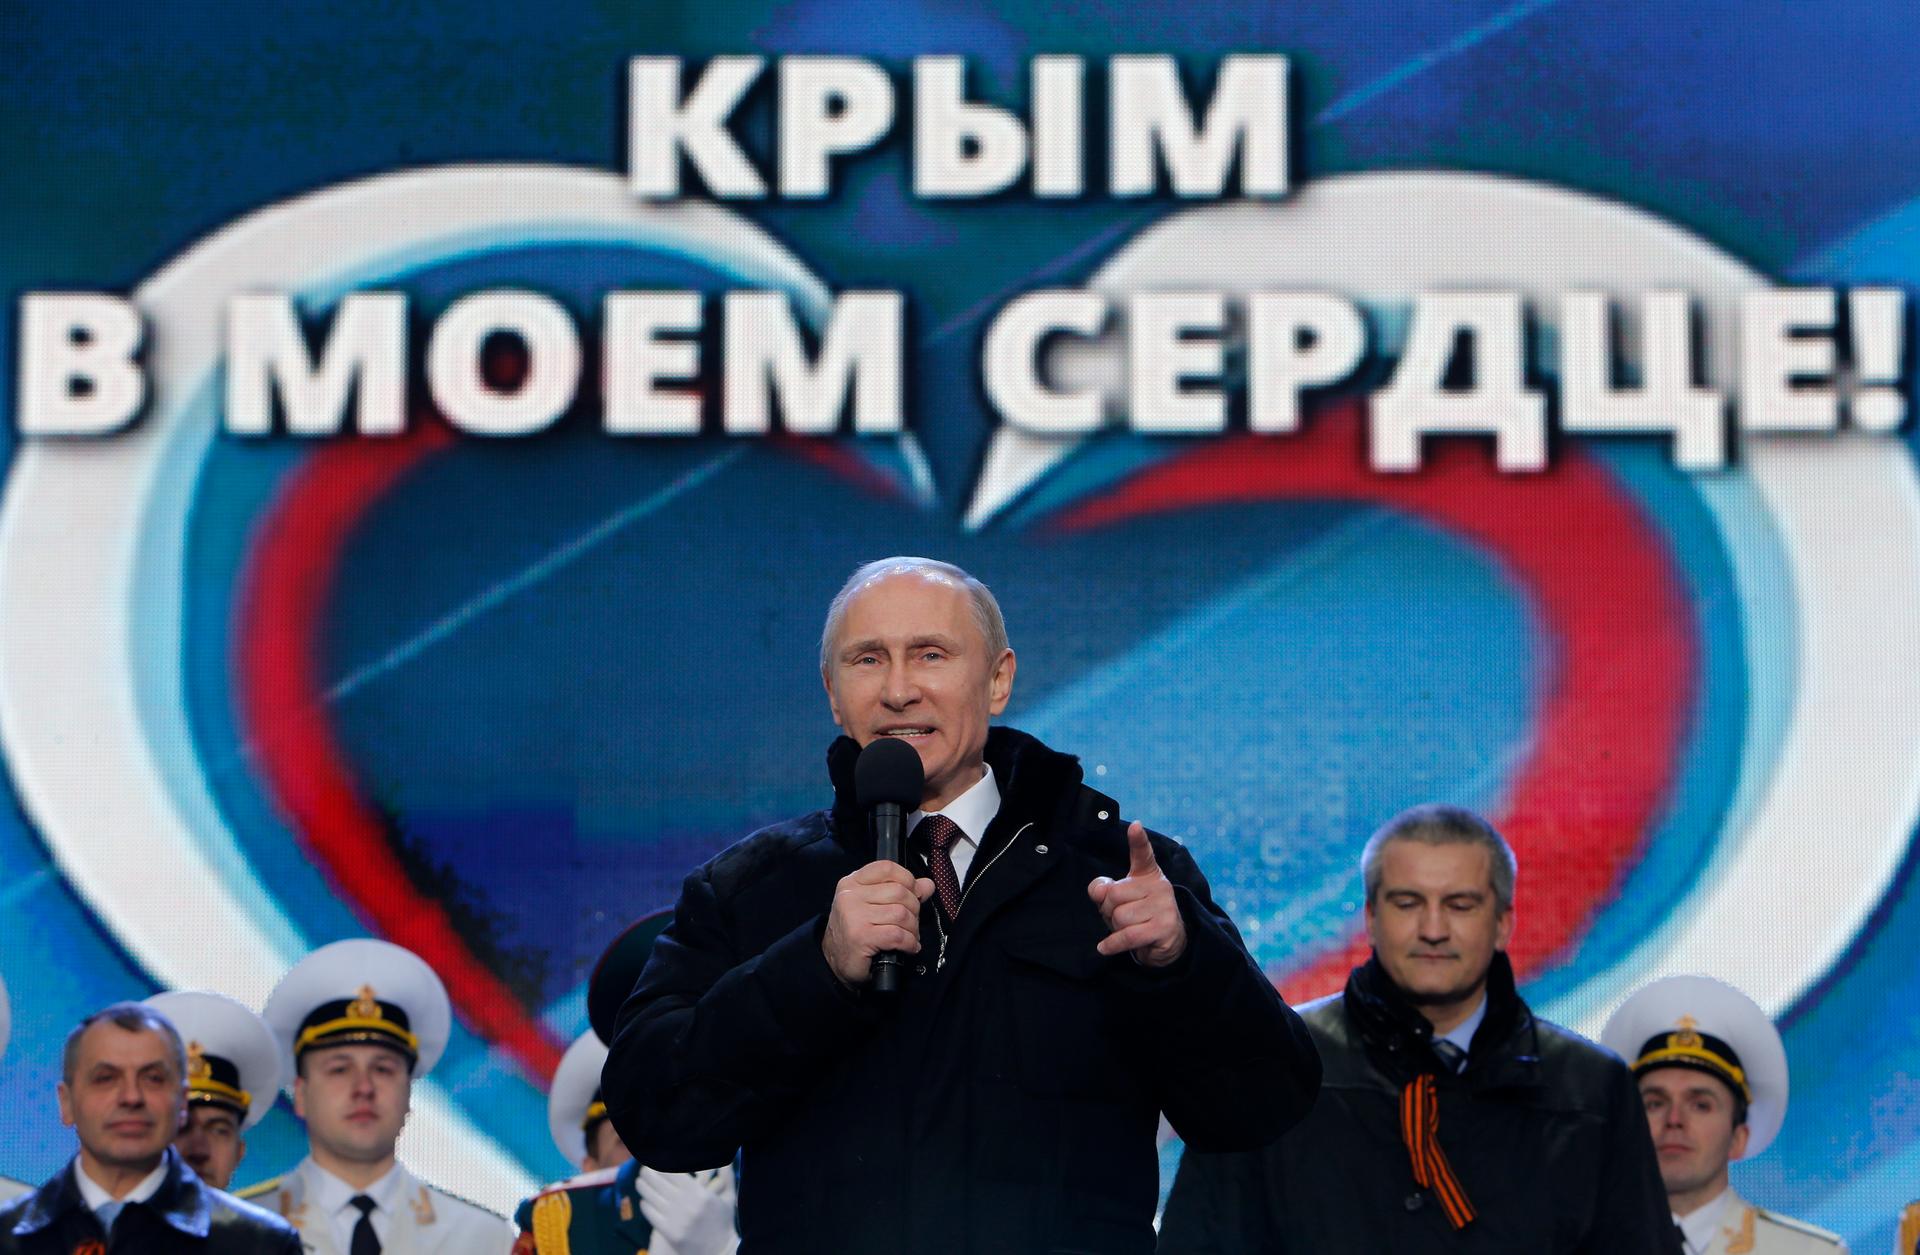 Russia's President Vladimir Putin addresses the audience during a March 18th rally and a concert in Moscow called "We are together" to support the annexation of Ukraine's Crimea to Russia. Defying Ukrainian protests and Western sanctions, Russia signed a